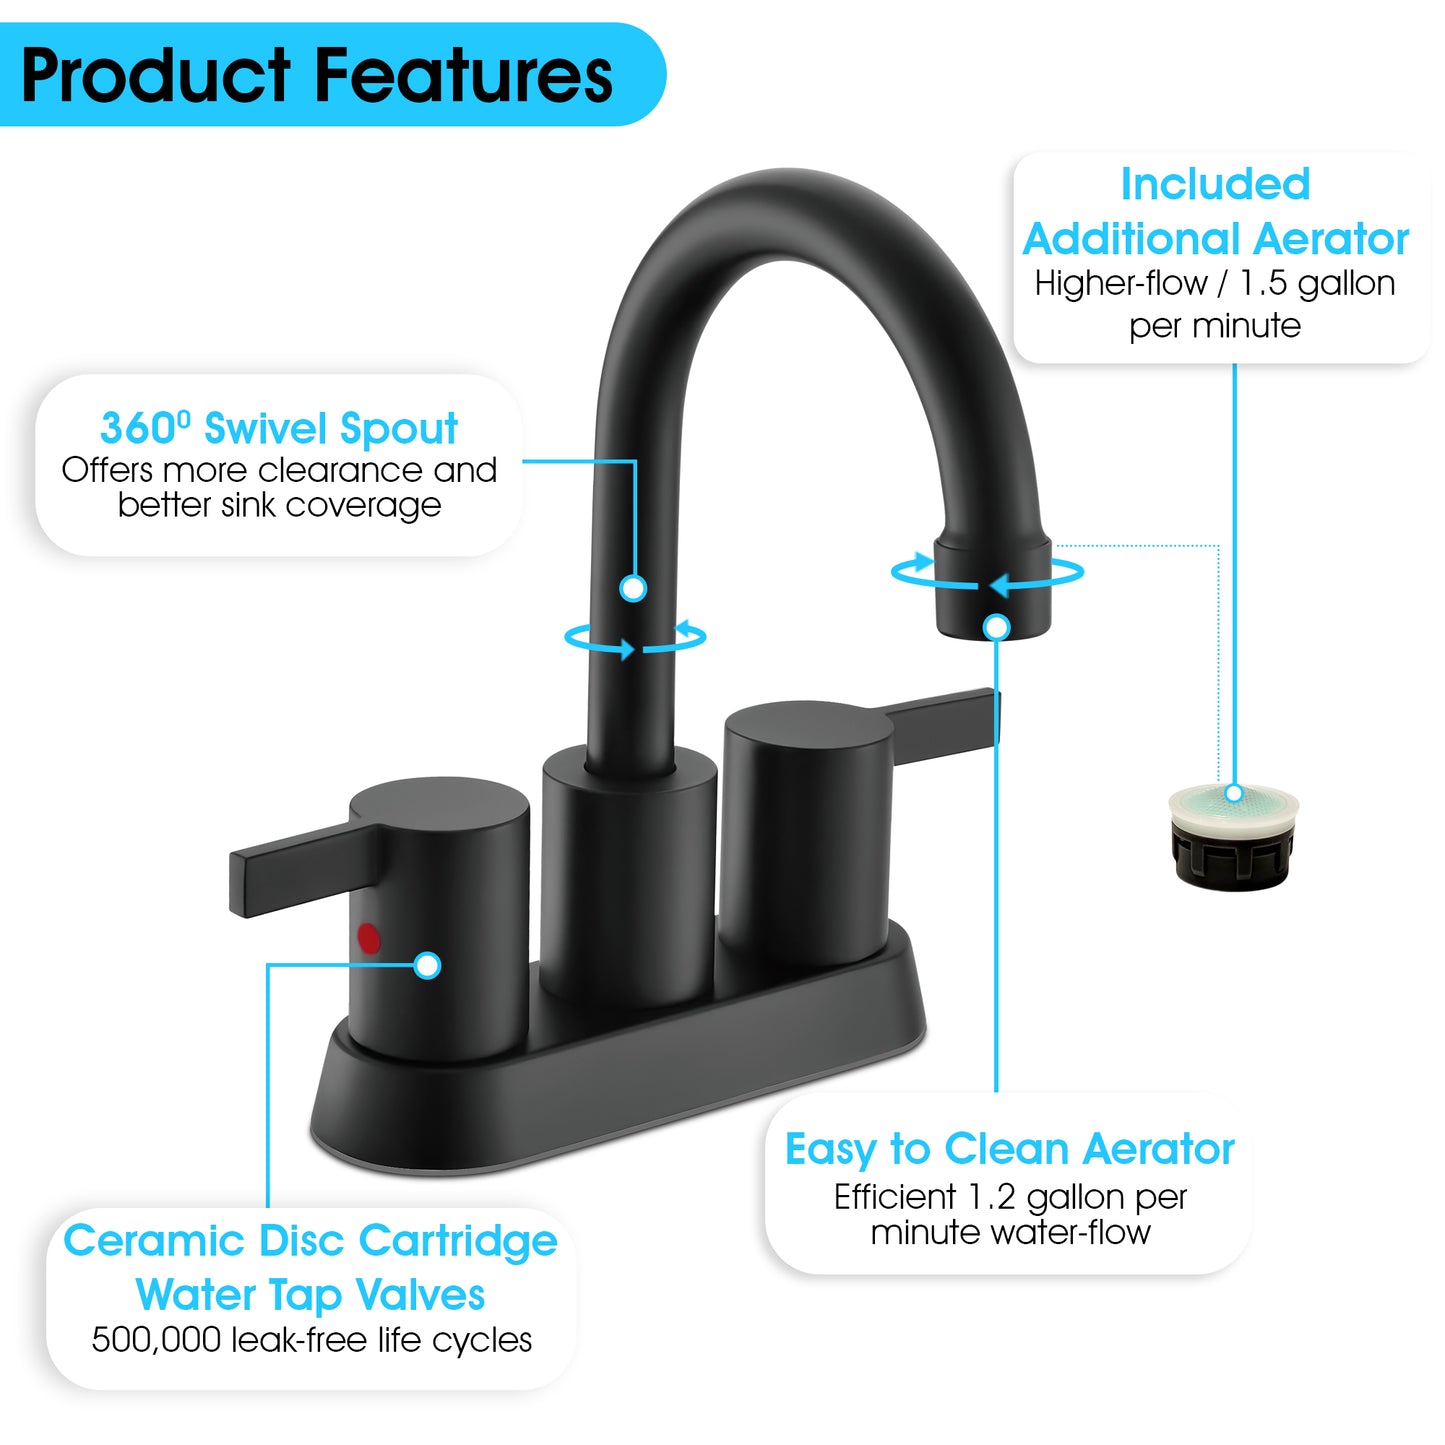 White bathroom faucet showing product features including swivel spout, ceramic cartridge and aerator.